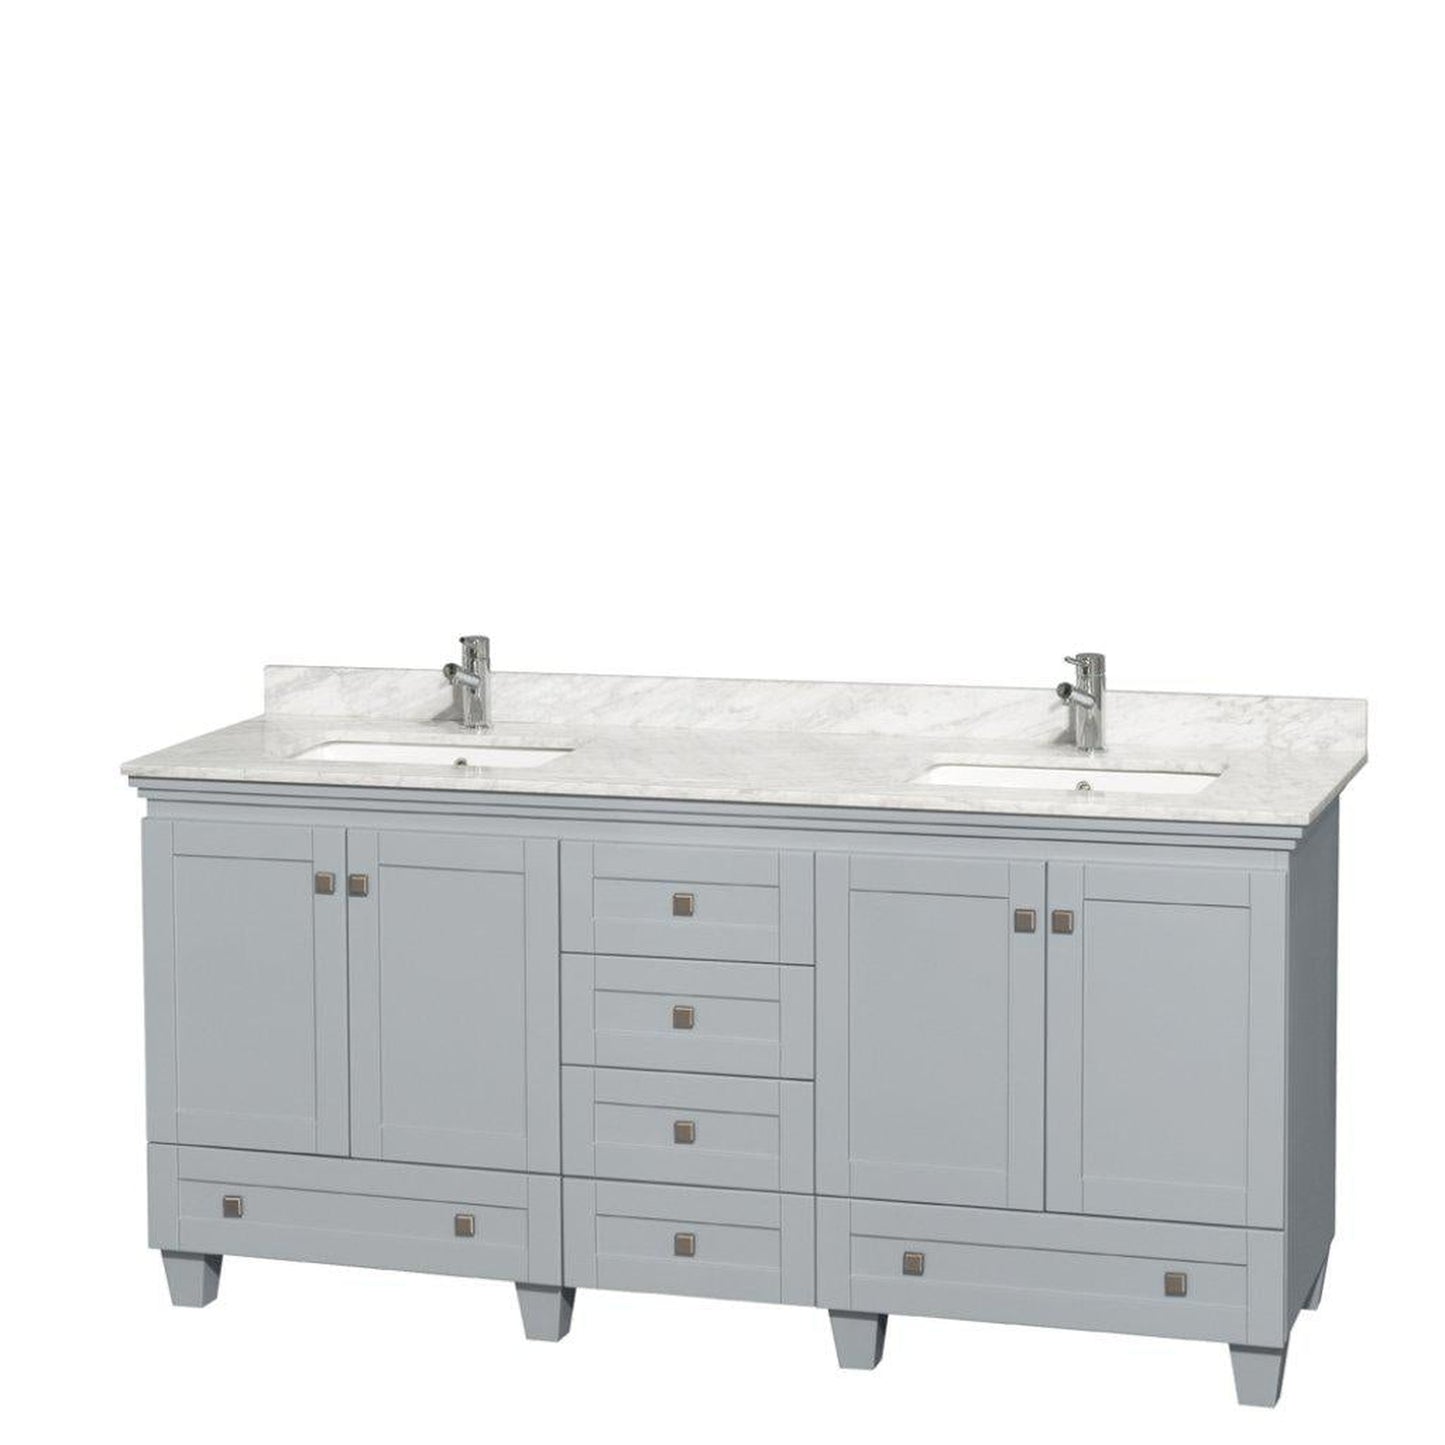 Wyndham Collection Acclaim 72" Double Bathroom Oyster Gray Vanity With White Carrara Marble Countertop And Undermount Square Sinks